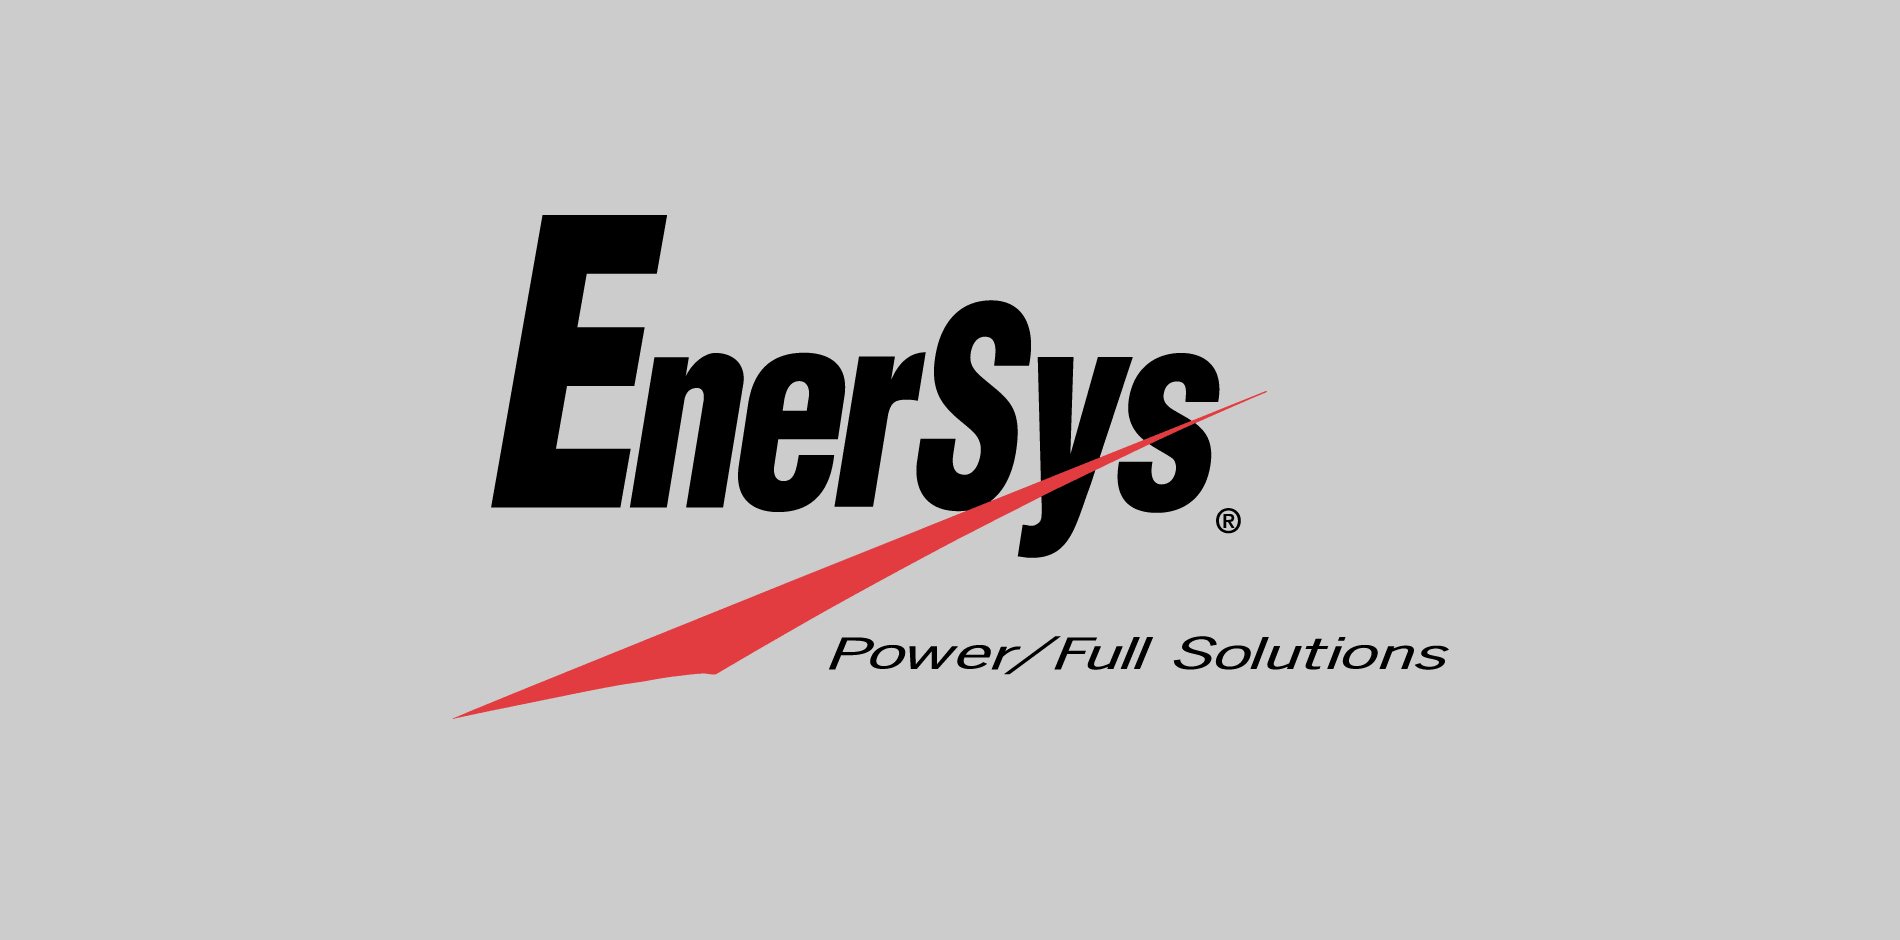 Enersys Logo Marking Their Brand Page